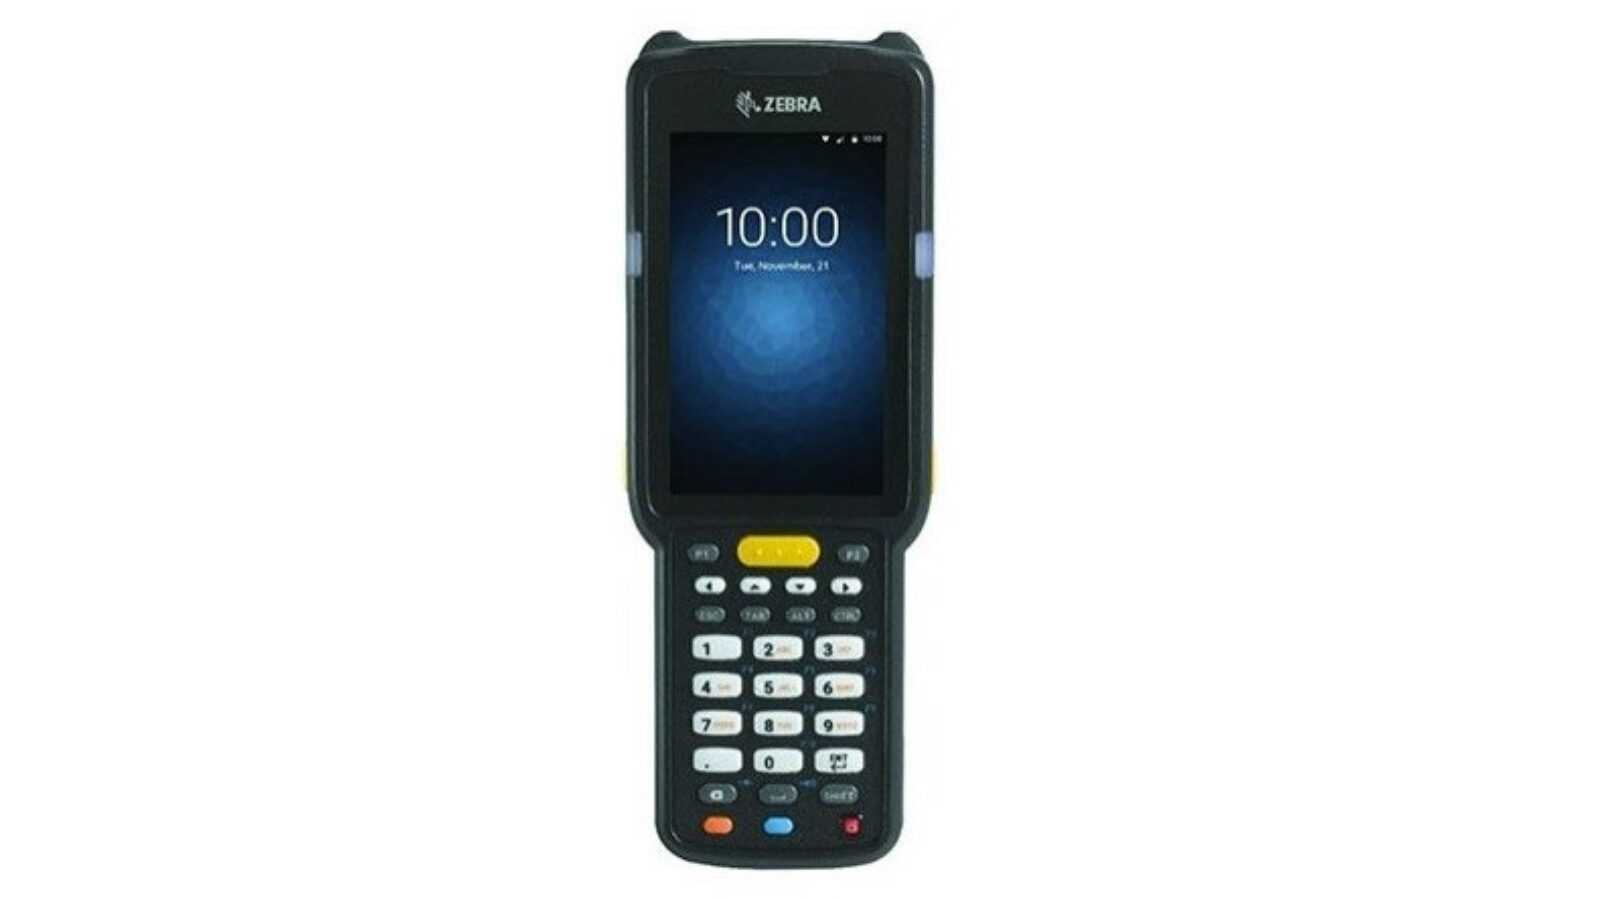 The Zebra Mc3300 Is A High Quality Mobile Computer Codipack 9010